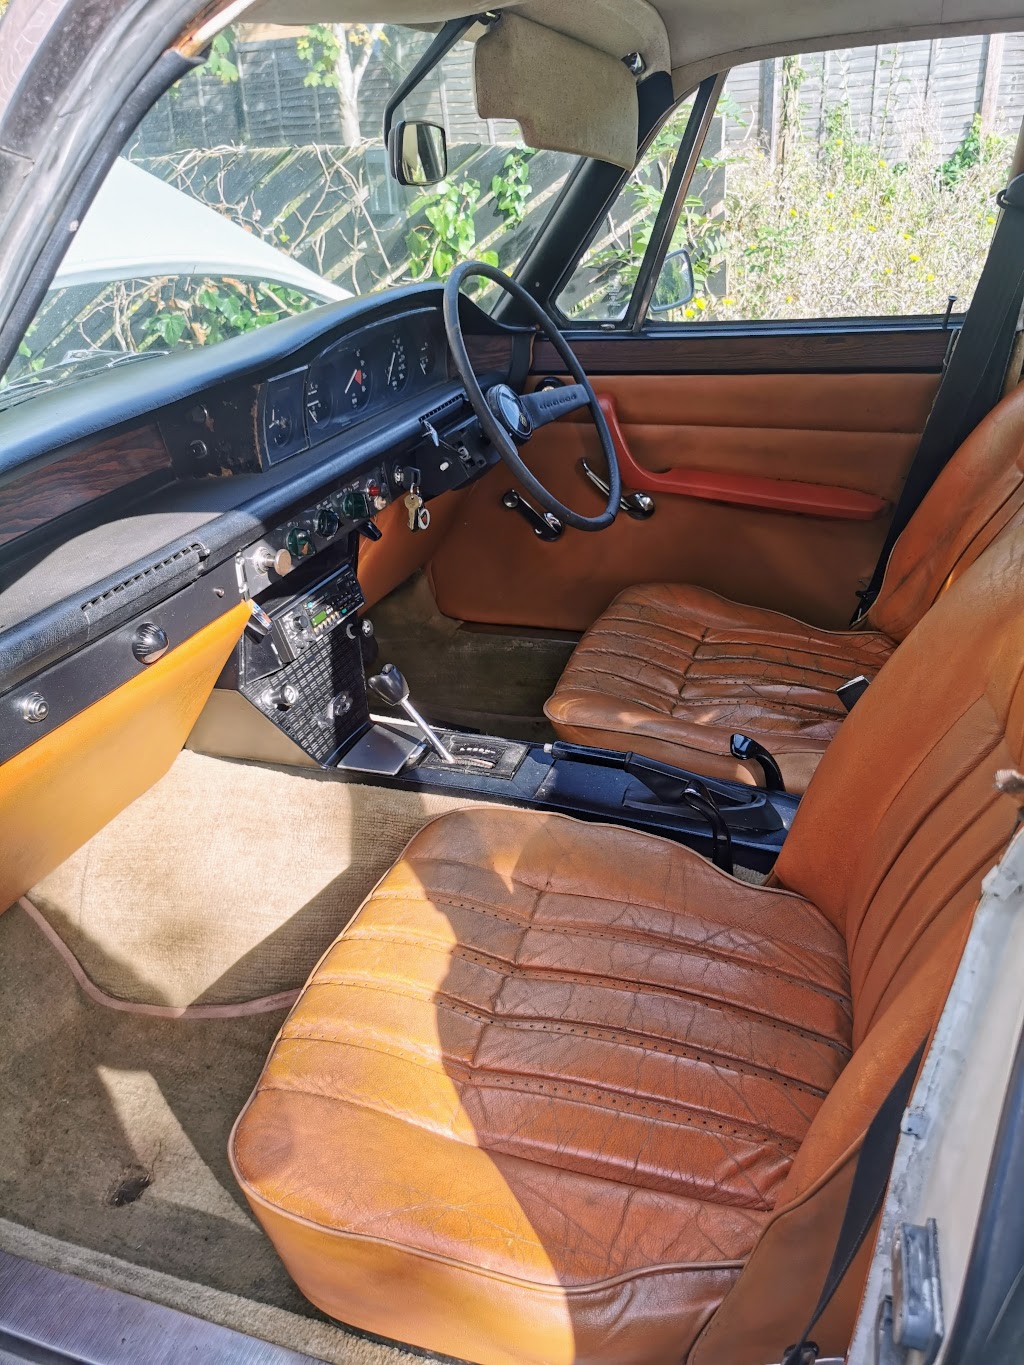 General overview of the front interior of a 1975 Rover P6 3500